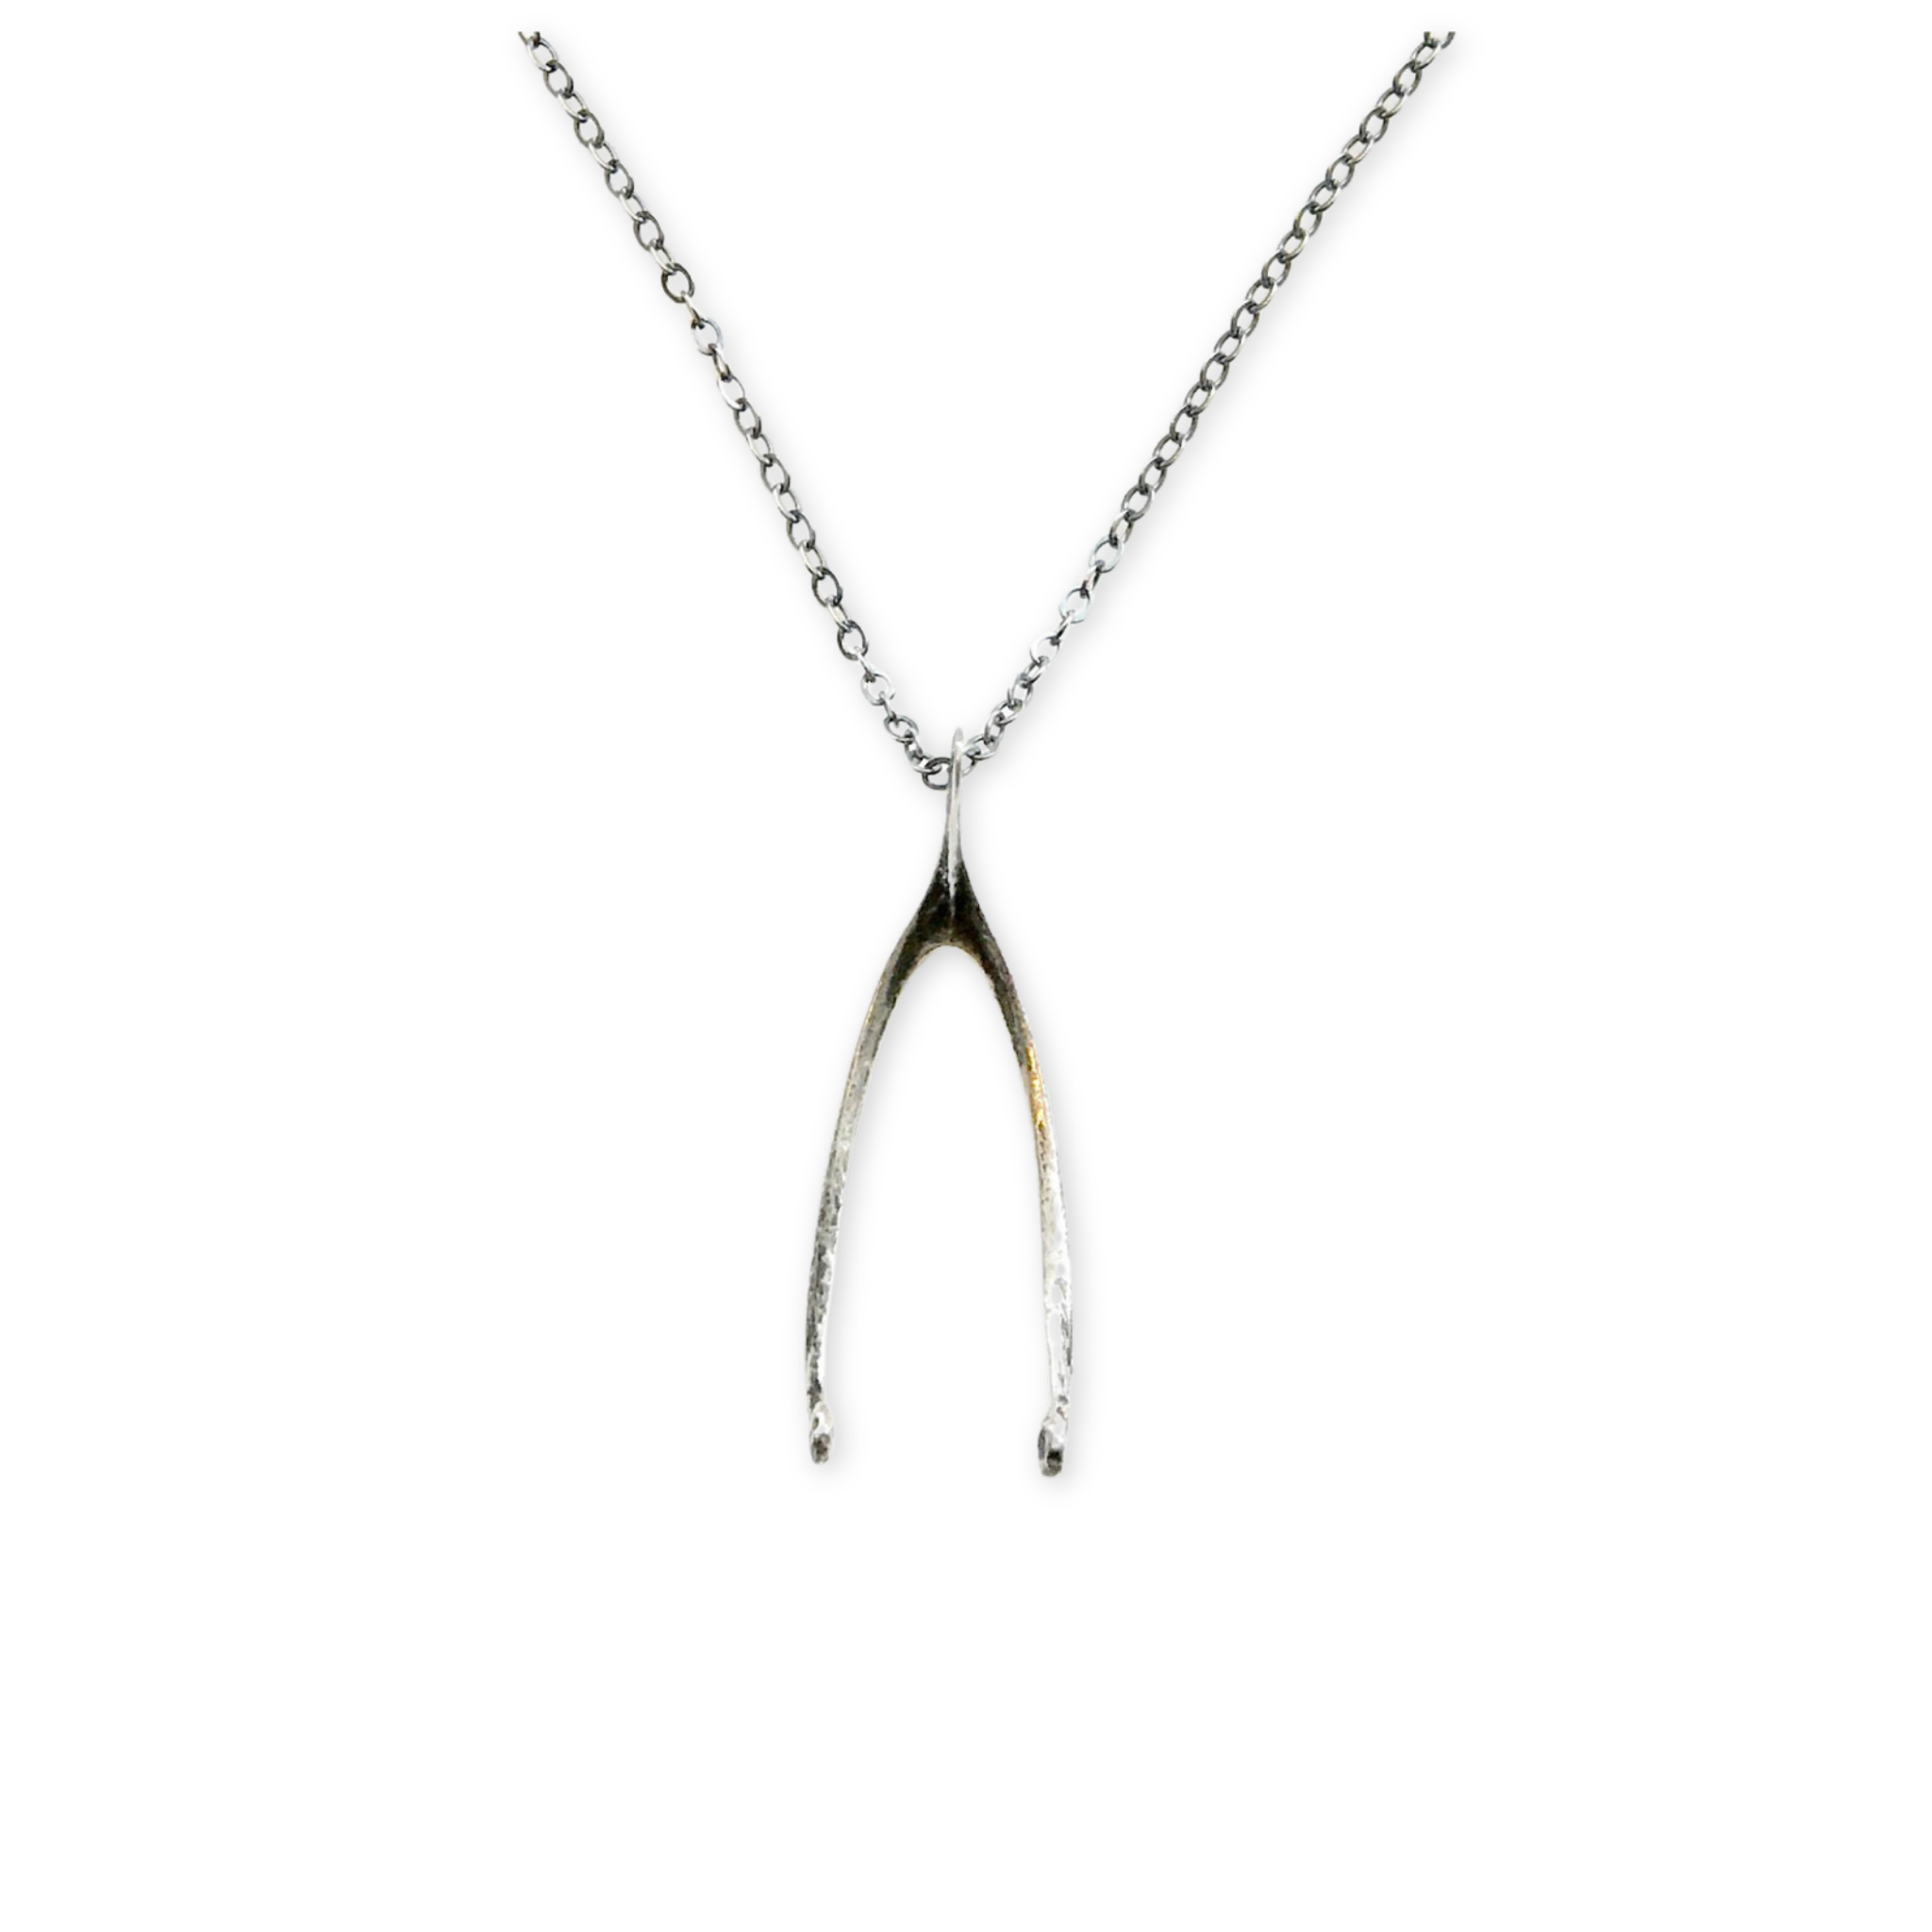 silver wish bone hanging on a necklace chain